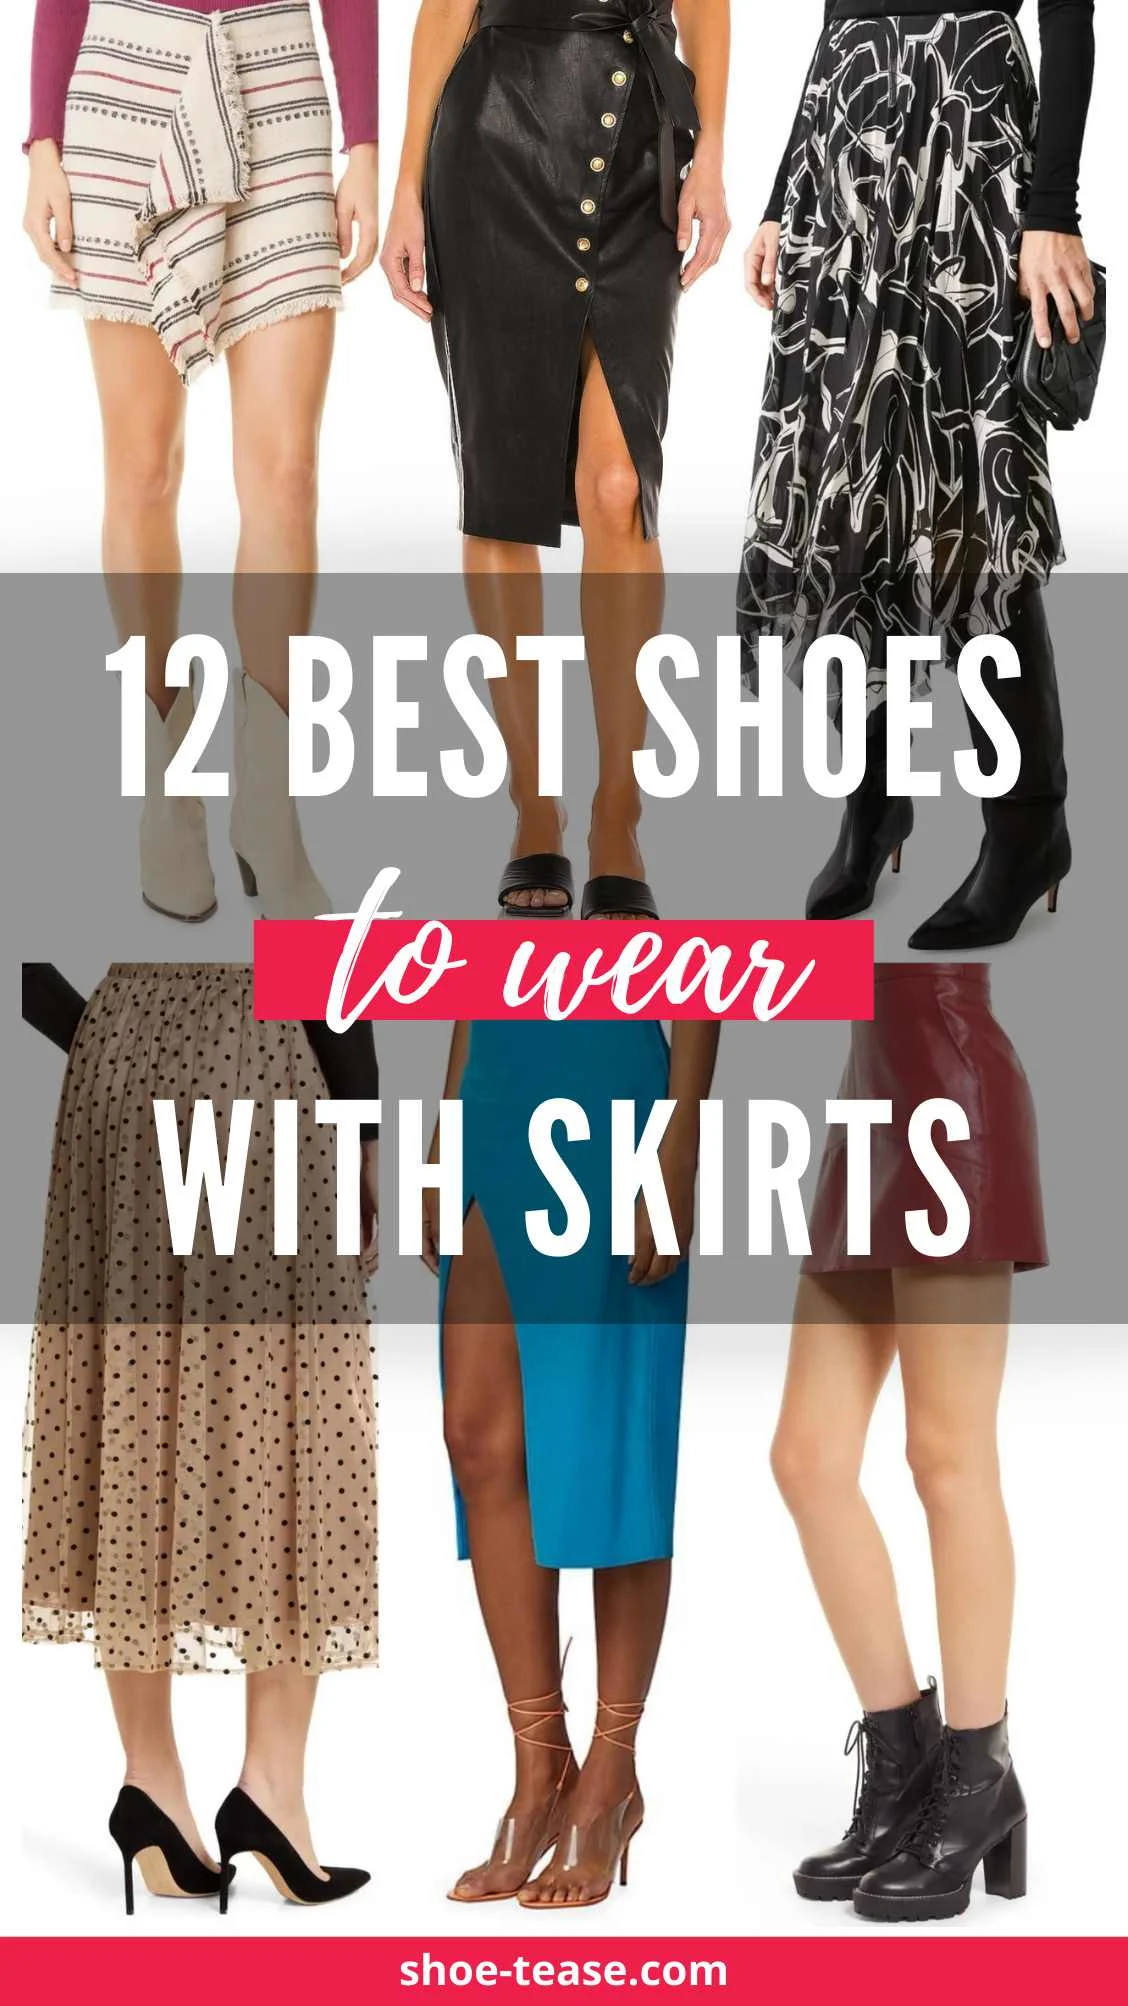 6 women wearing different skirts with shoes of various styles.